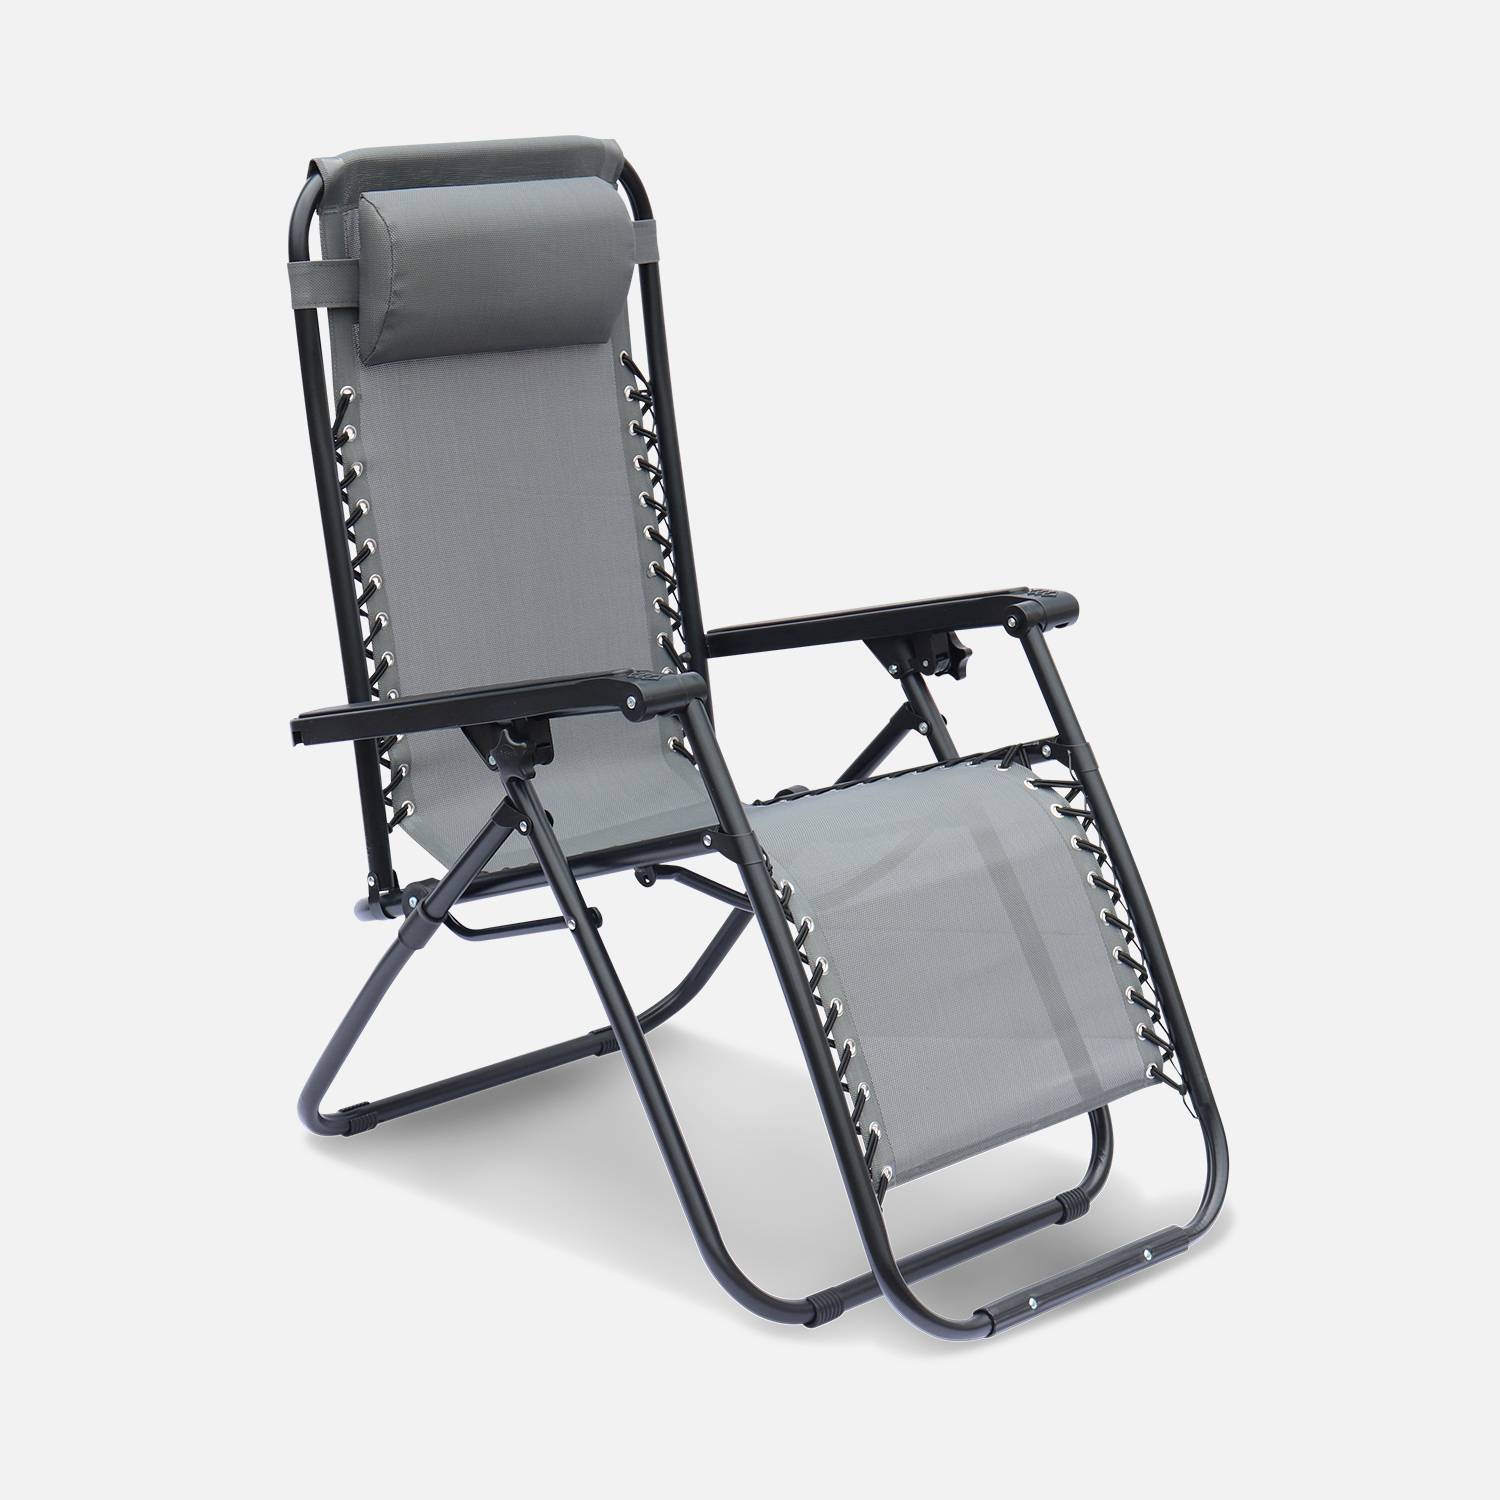 2 textilene reclining chairs - foldable, multi-position - Patrick - Anthracite,sweeek,Photo4